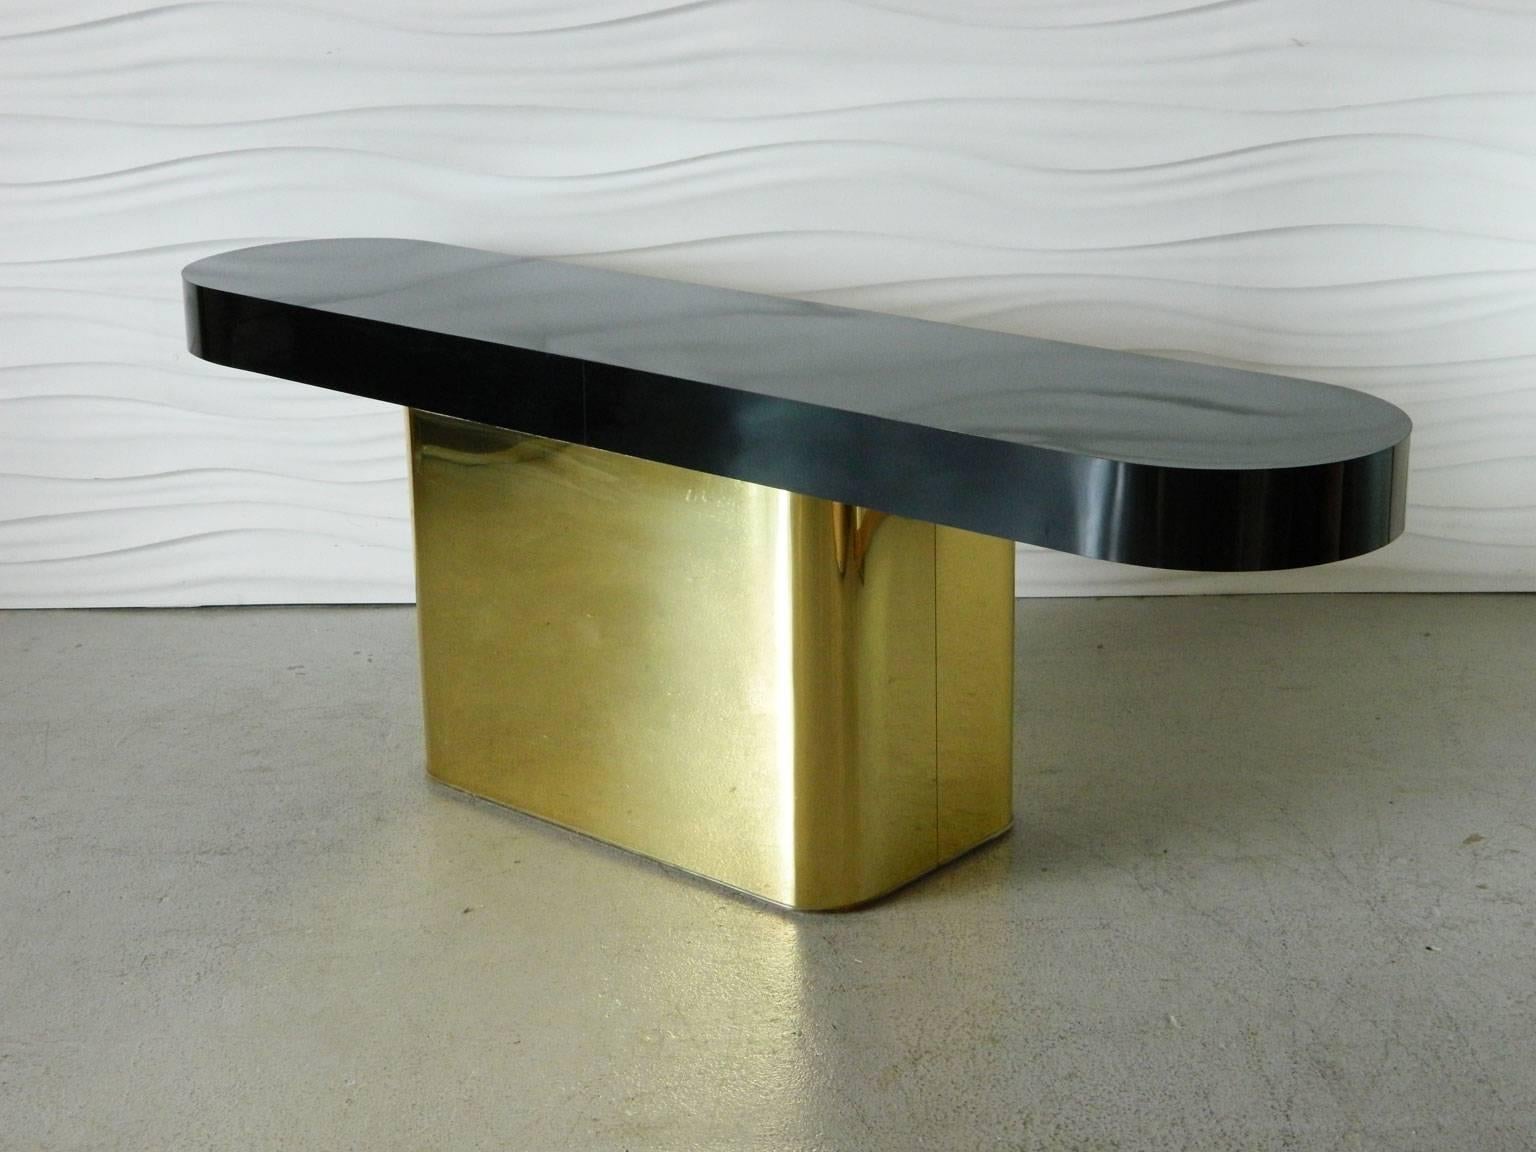 Designed by Milo Baughman for Thayer Coggin, this console table has a base wrapped in a brass finish and a black glossy laminate top. Two fully-upholstered stools nest underneath to provide additional seating. The stools measure 22.5